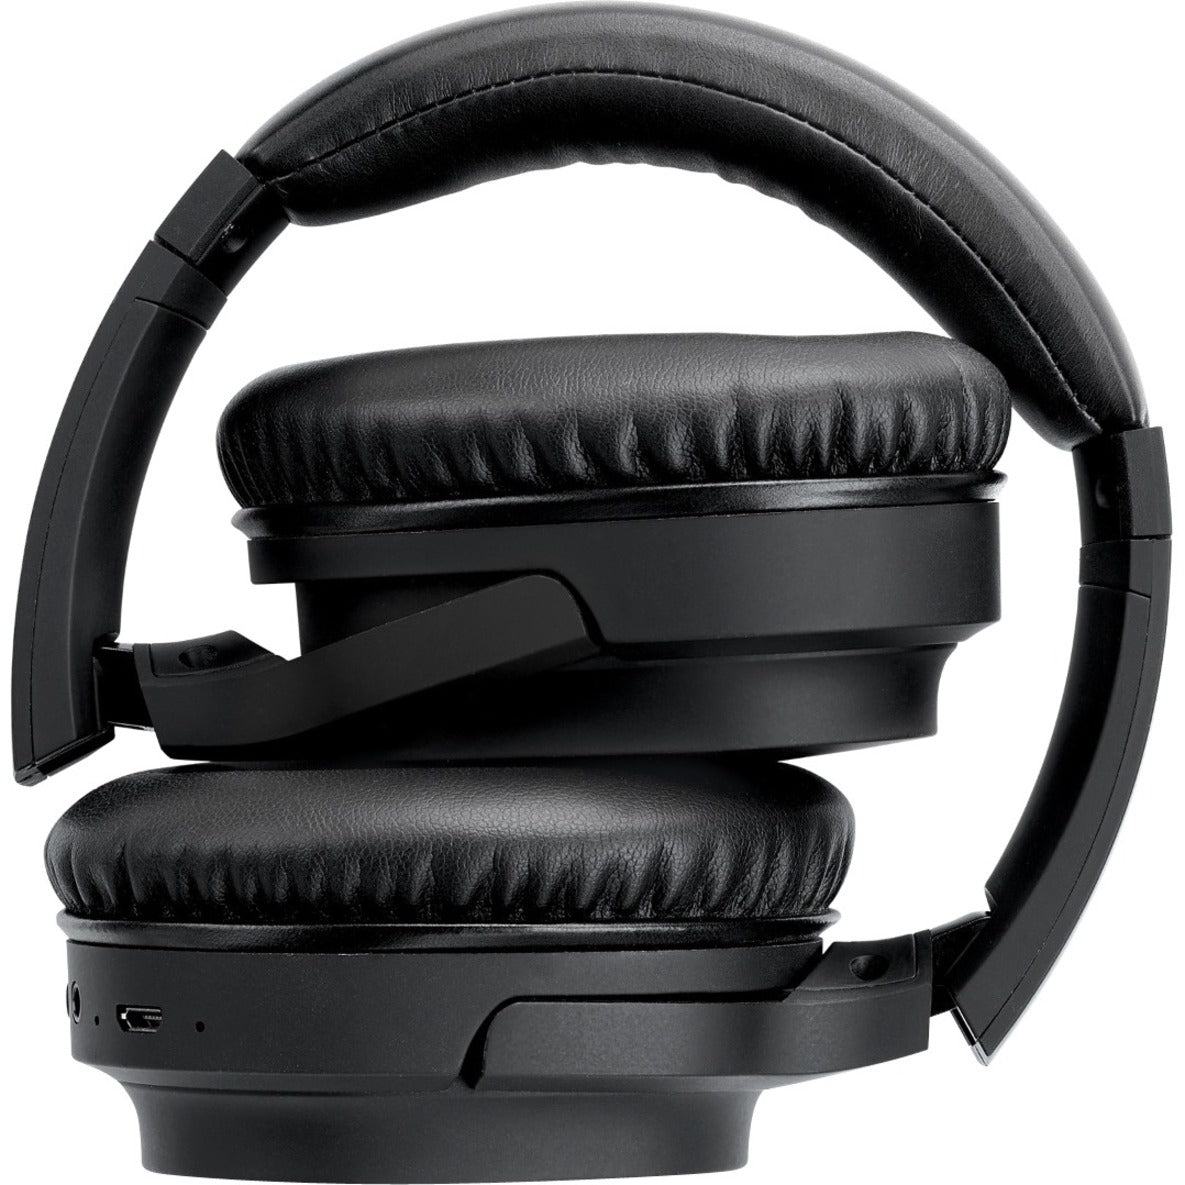 iLive IAHN40B Headset, Wireless Bluetooth On-ear Headset with Active Noise Canceling, Rechargeable Battery, and USB Charging